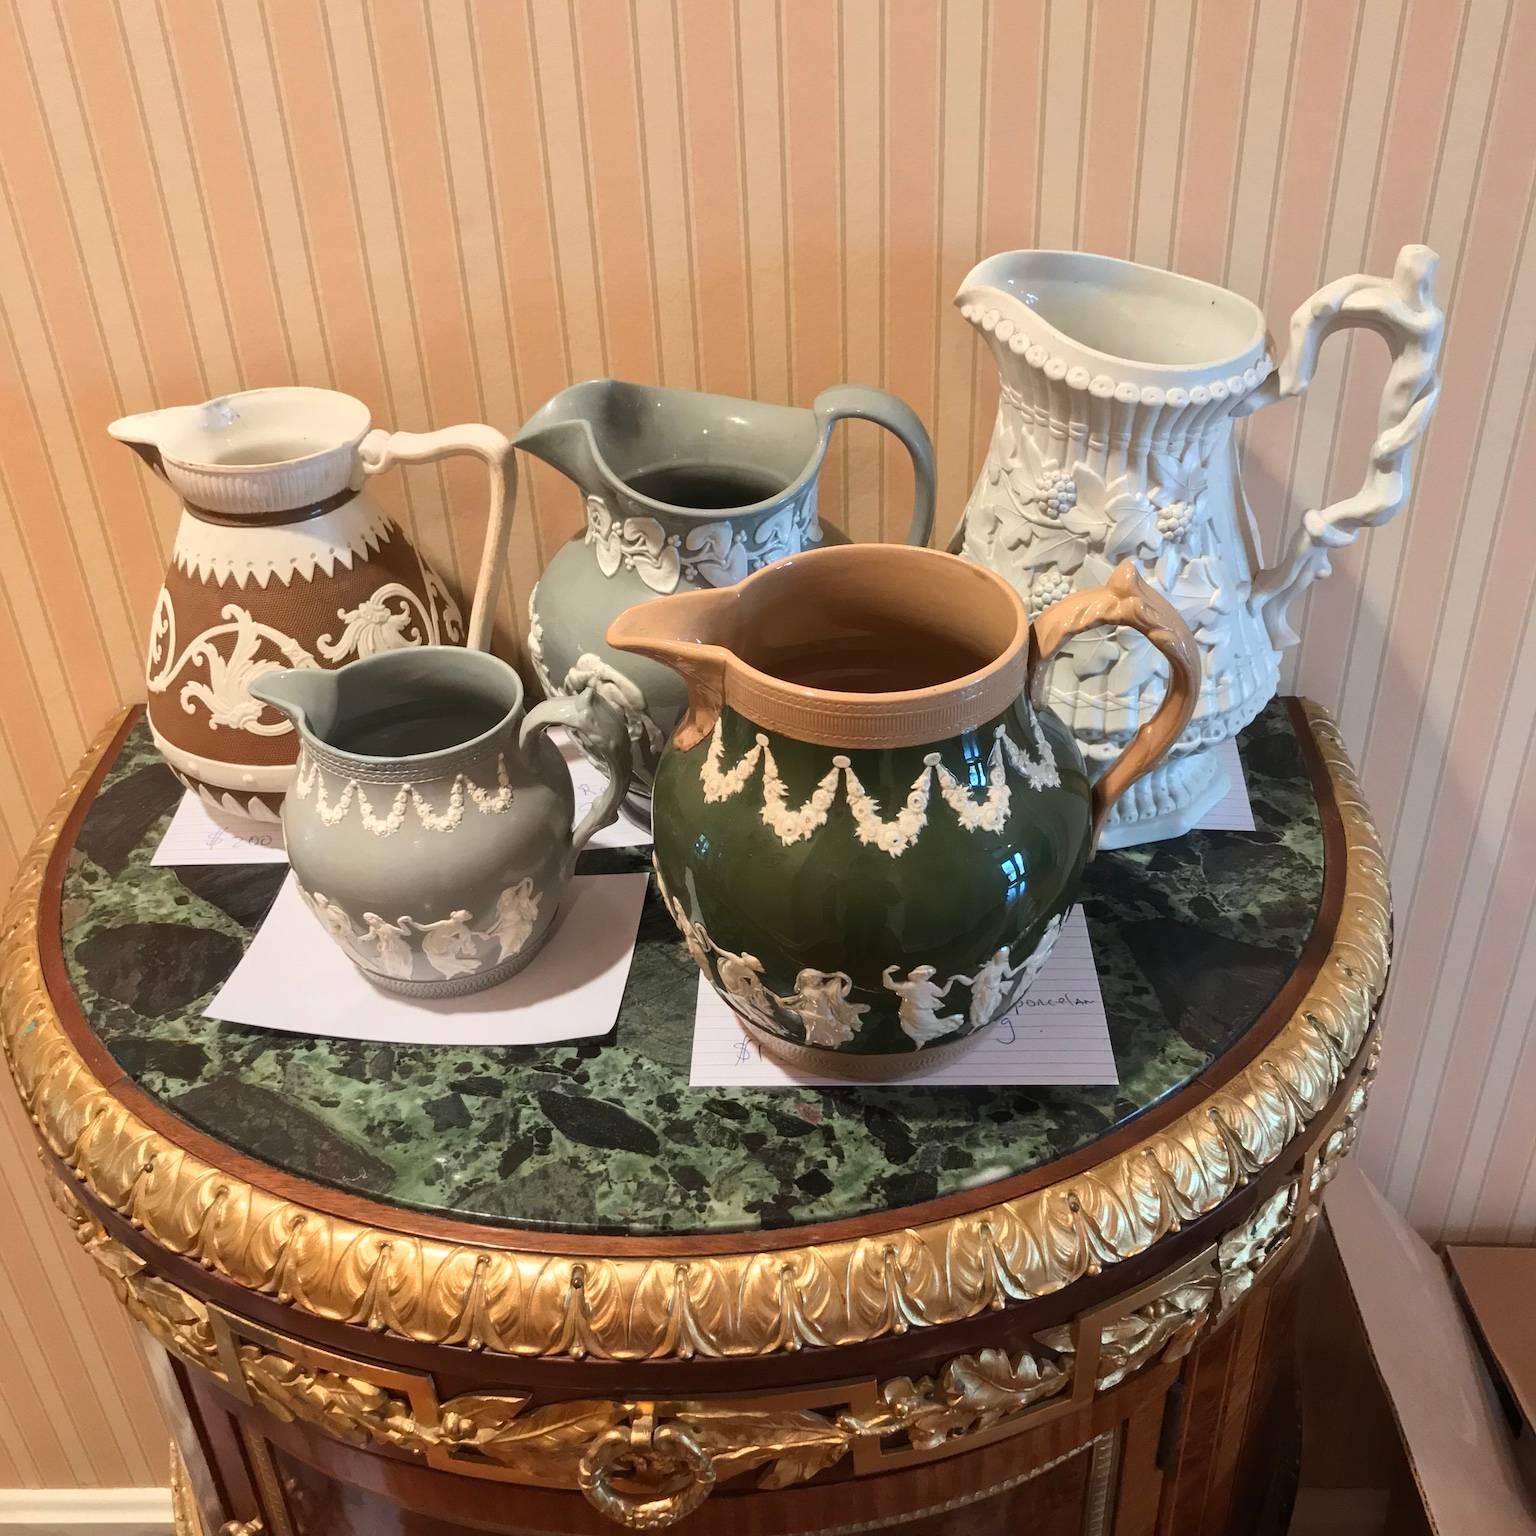 Lot of five relief pitchers and jugs with decorated scenes; several by Cobridge and Copelands. All are in excellent condition and marked on bottom. Dimensions (Height x Width) - First: 7